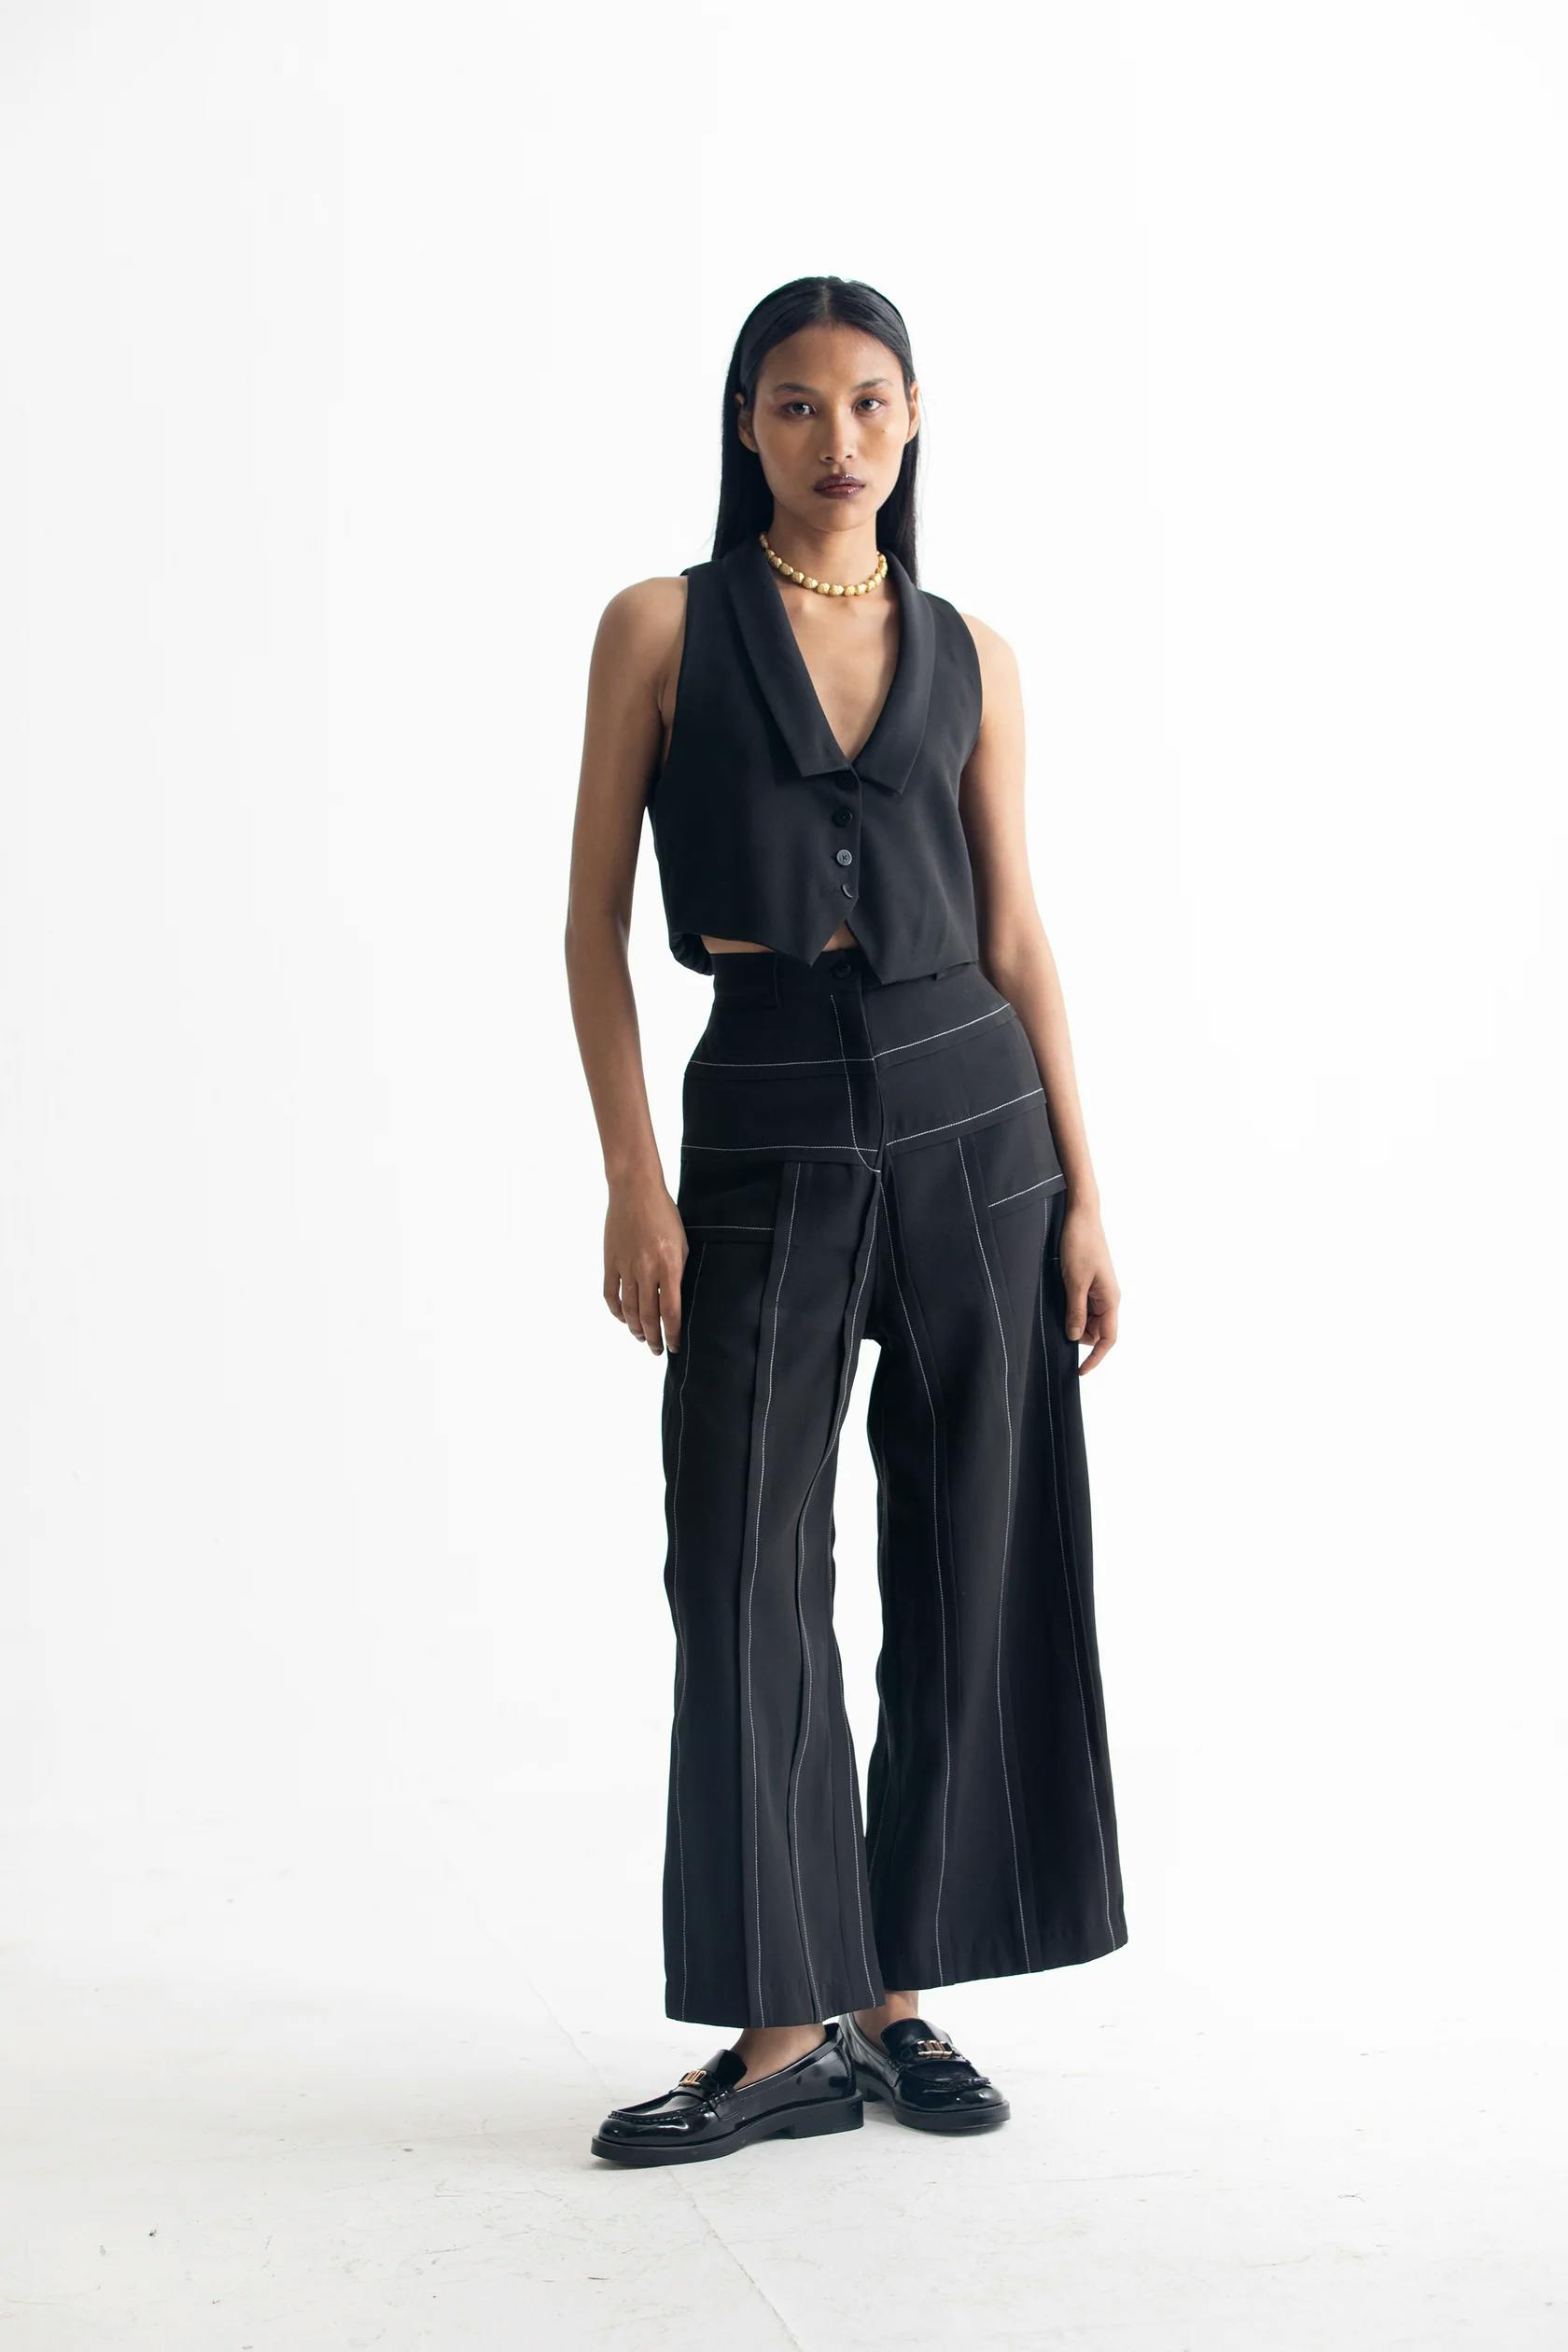 Top-stitch detailed Co-ord set, a product by Corpora Studio